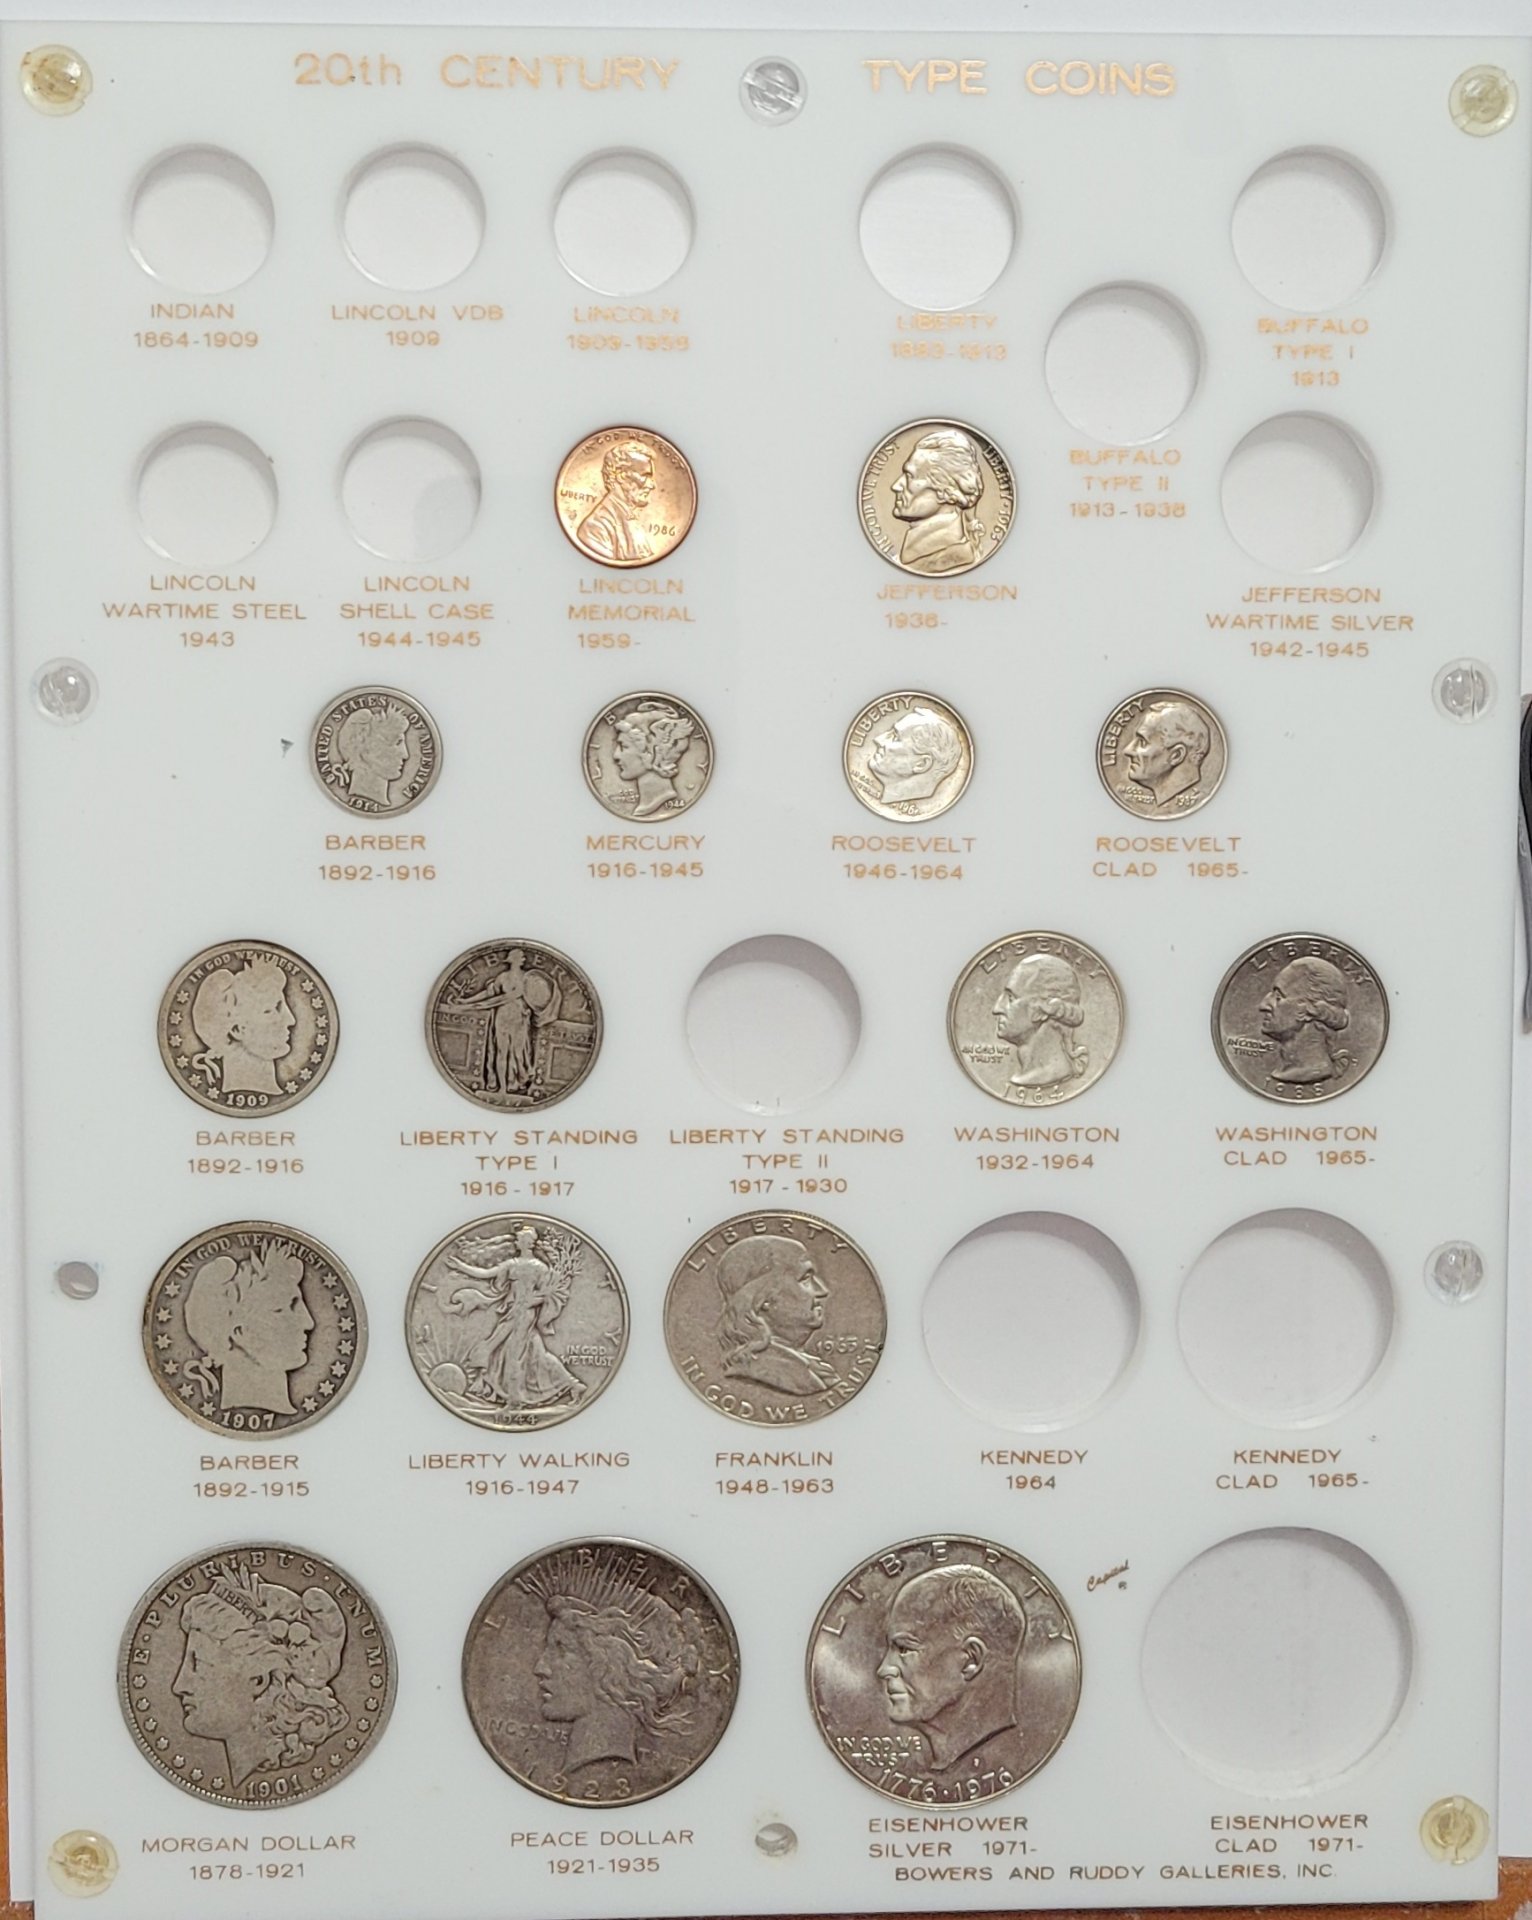 Capital Plastics Coin Holder 20th Century Type Coins White Bowers Rudy Galleries 2.jpg